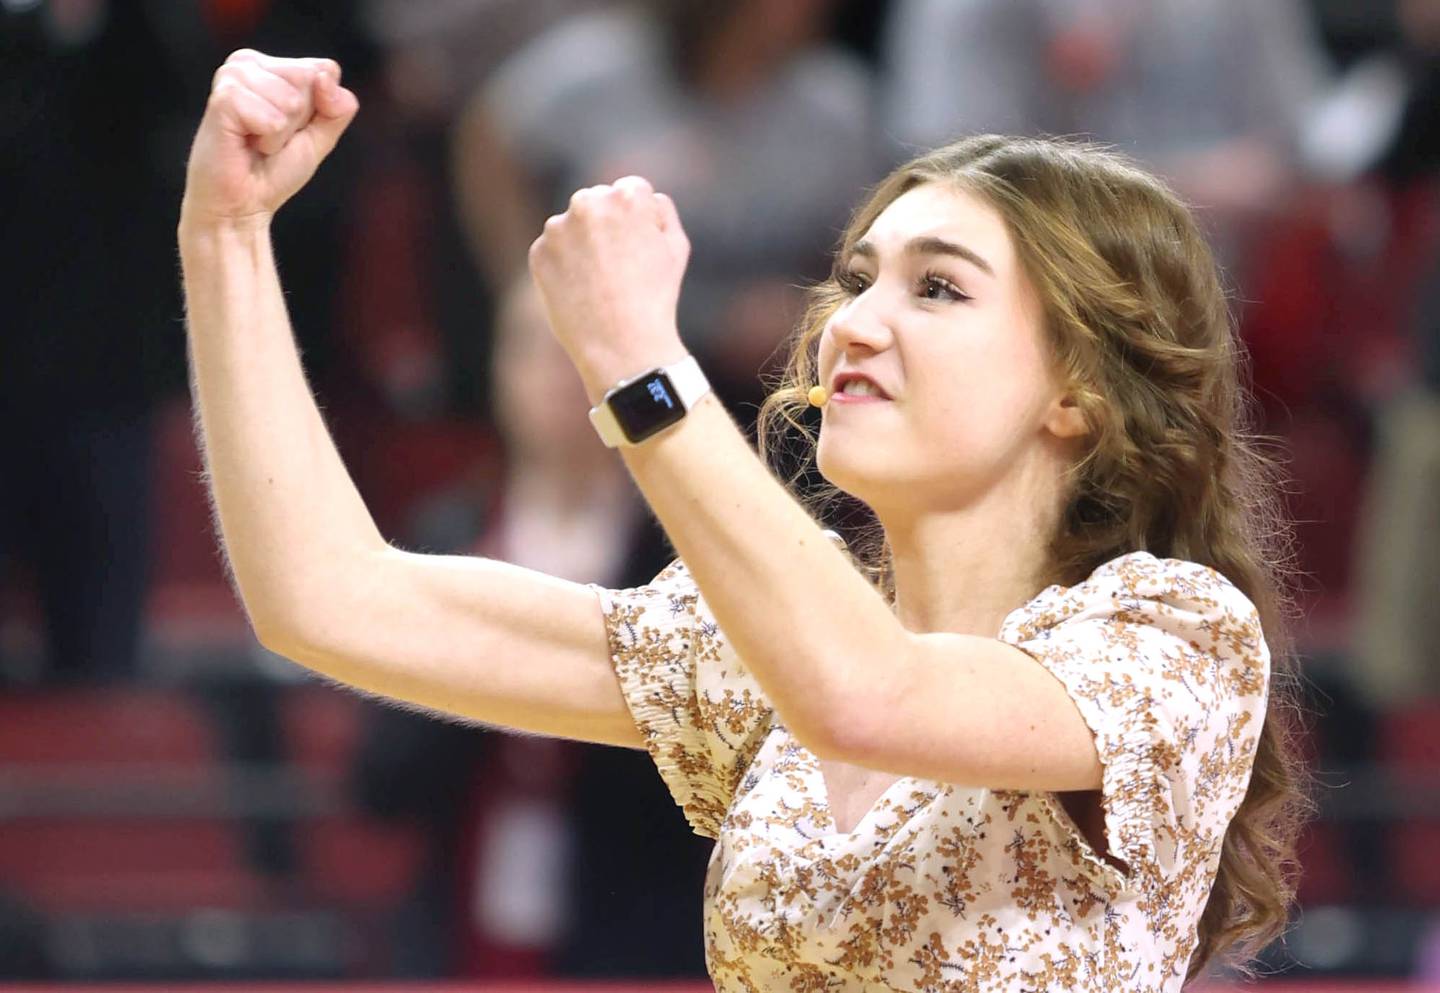 Rock Falls sophomore Remington Collins sings and signs the national anthem before the women's basketball game in the Class 4A State Semifinals, Friday, March 4, 2022, at Redbird Arena in the Illinois State University at Normal.